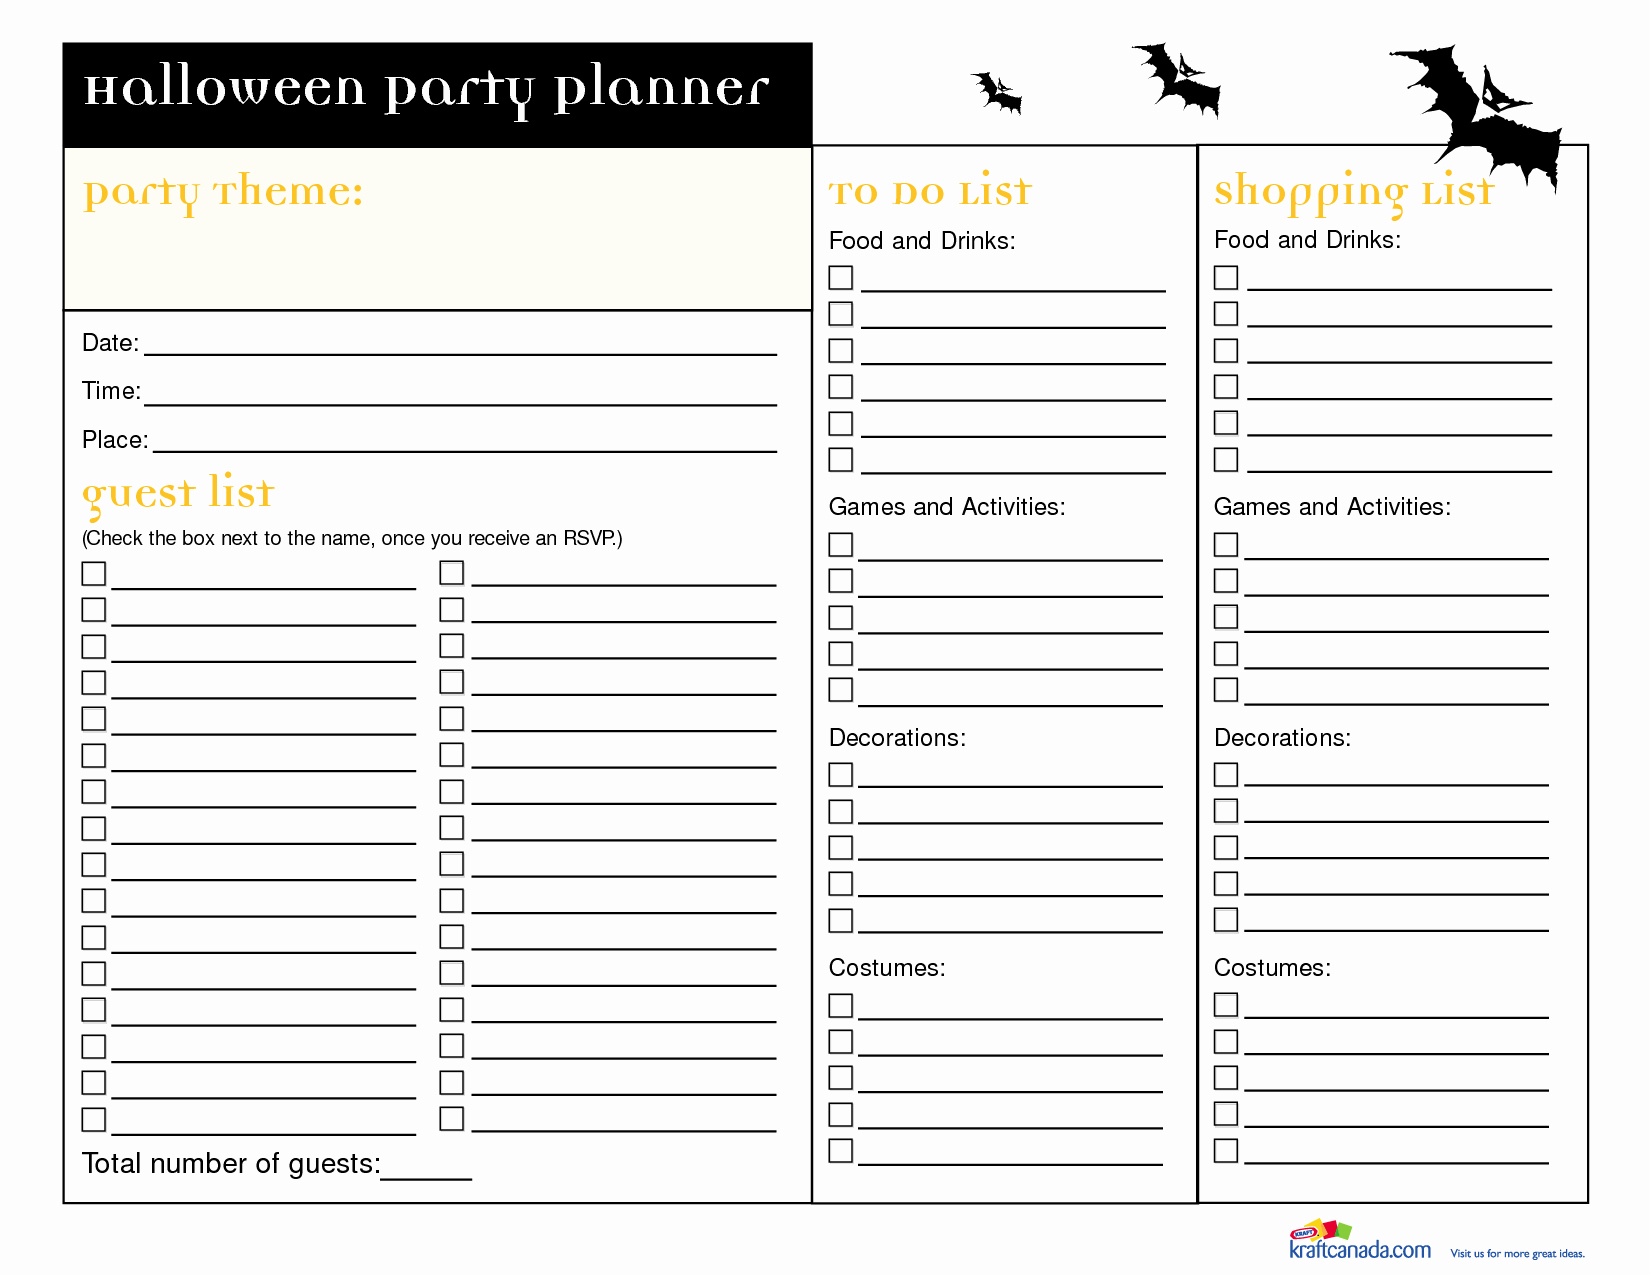 Birthday Party Guest List Template New Birthday Party Guest List Portablegasgrillweber